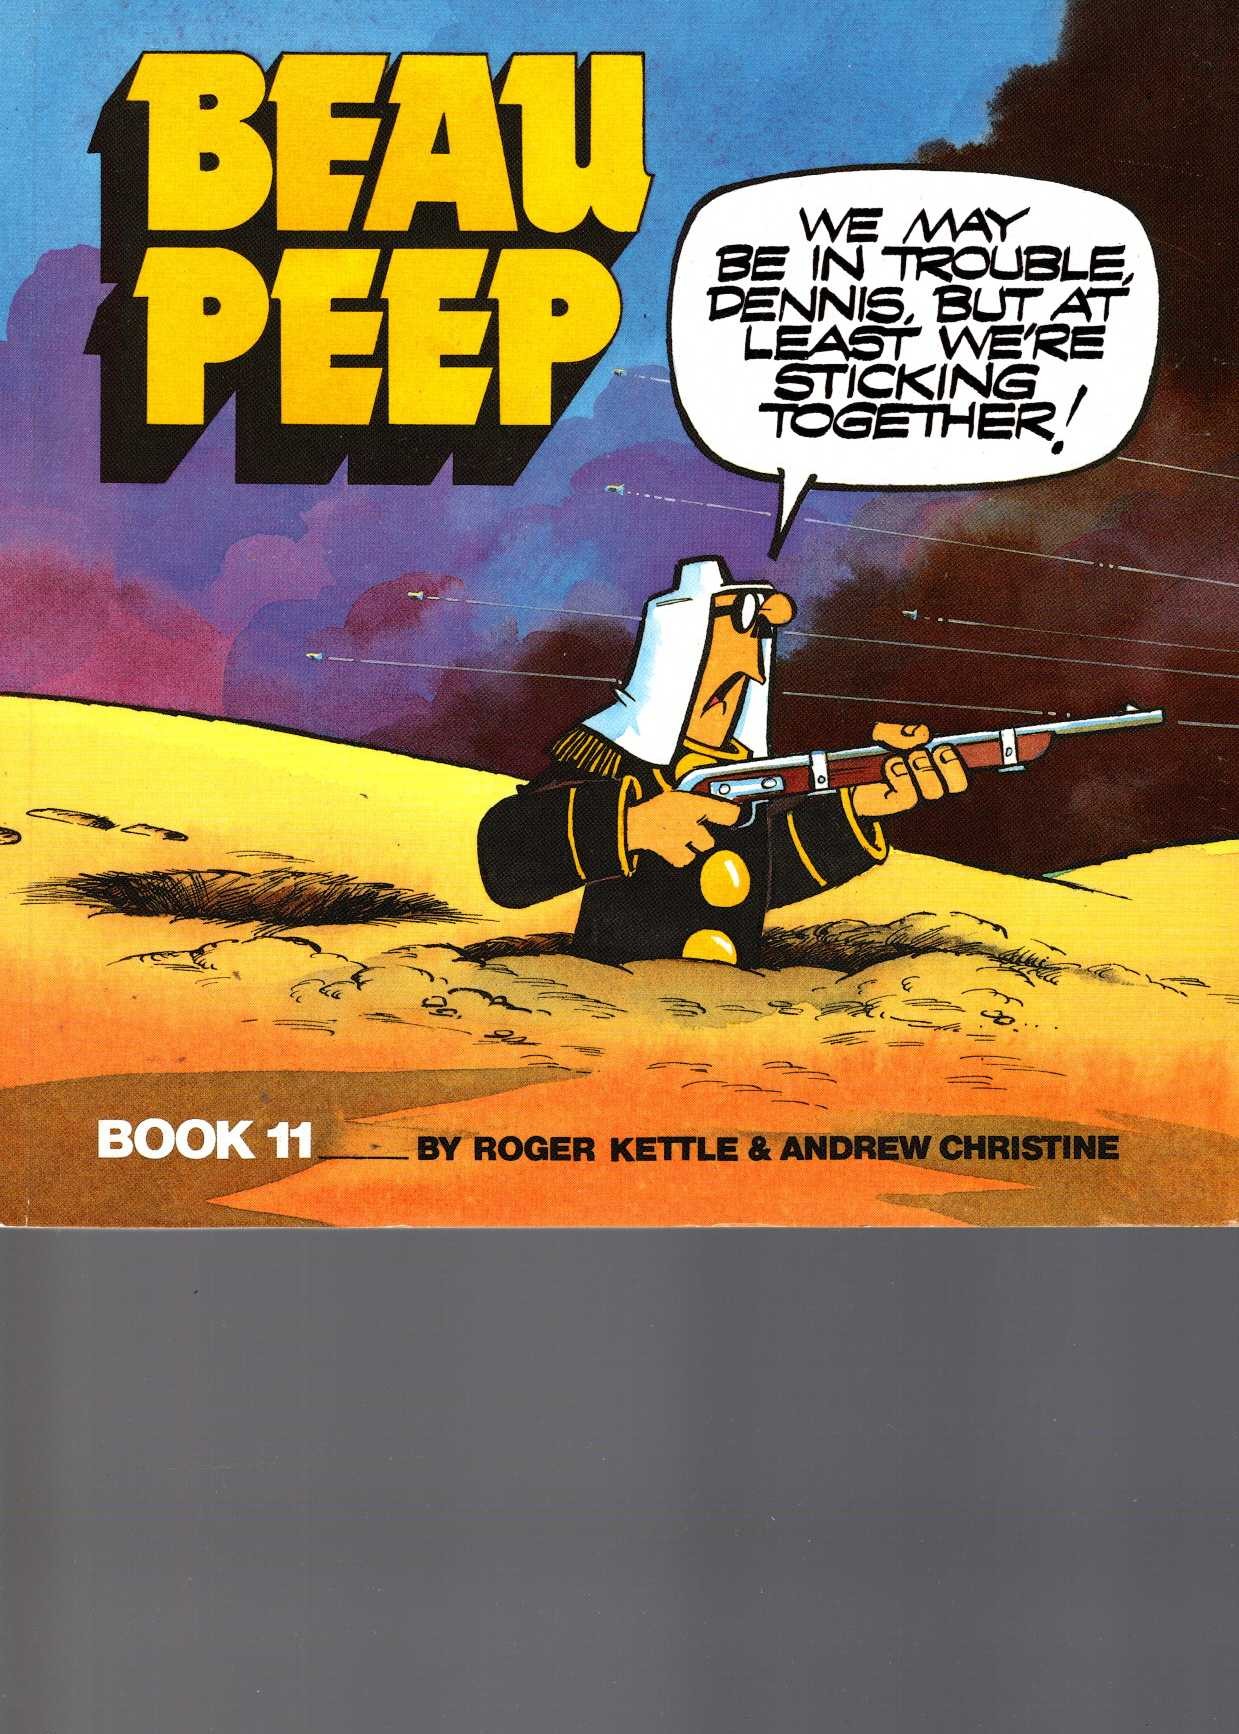 BEAU PEEP BOOK 11 front book cover image